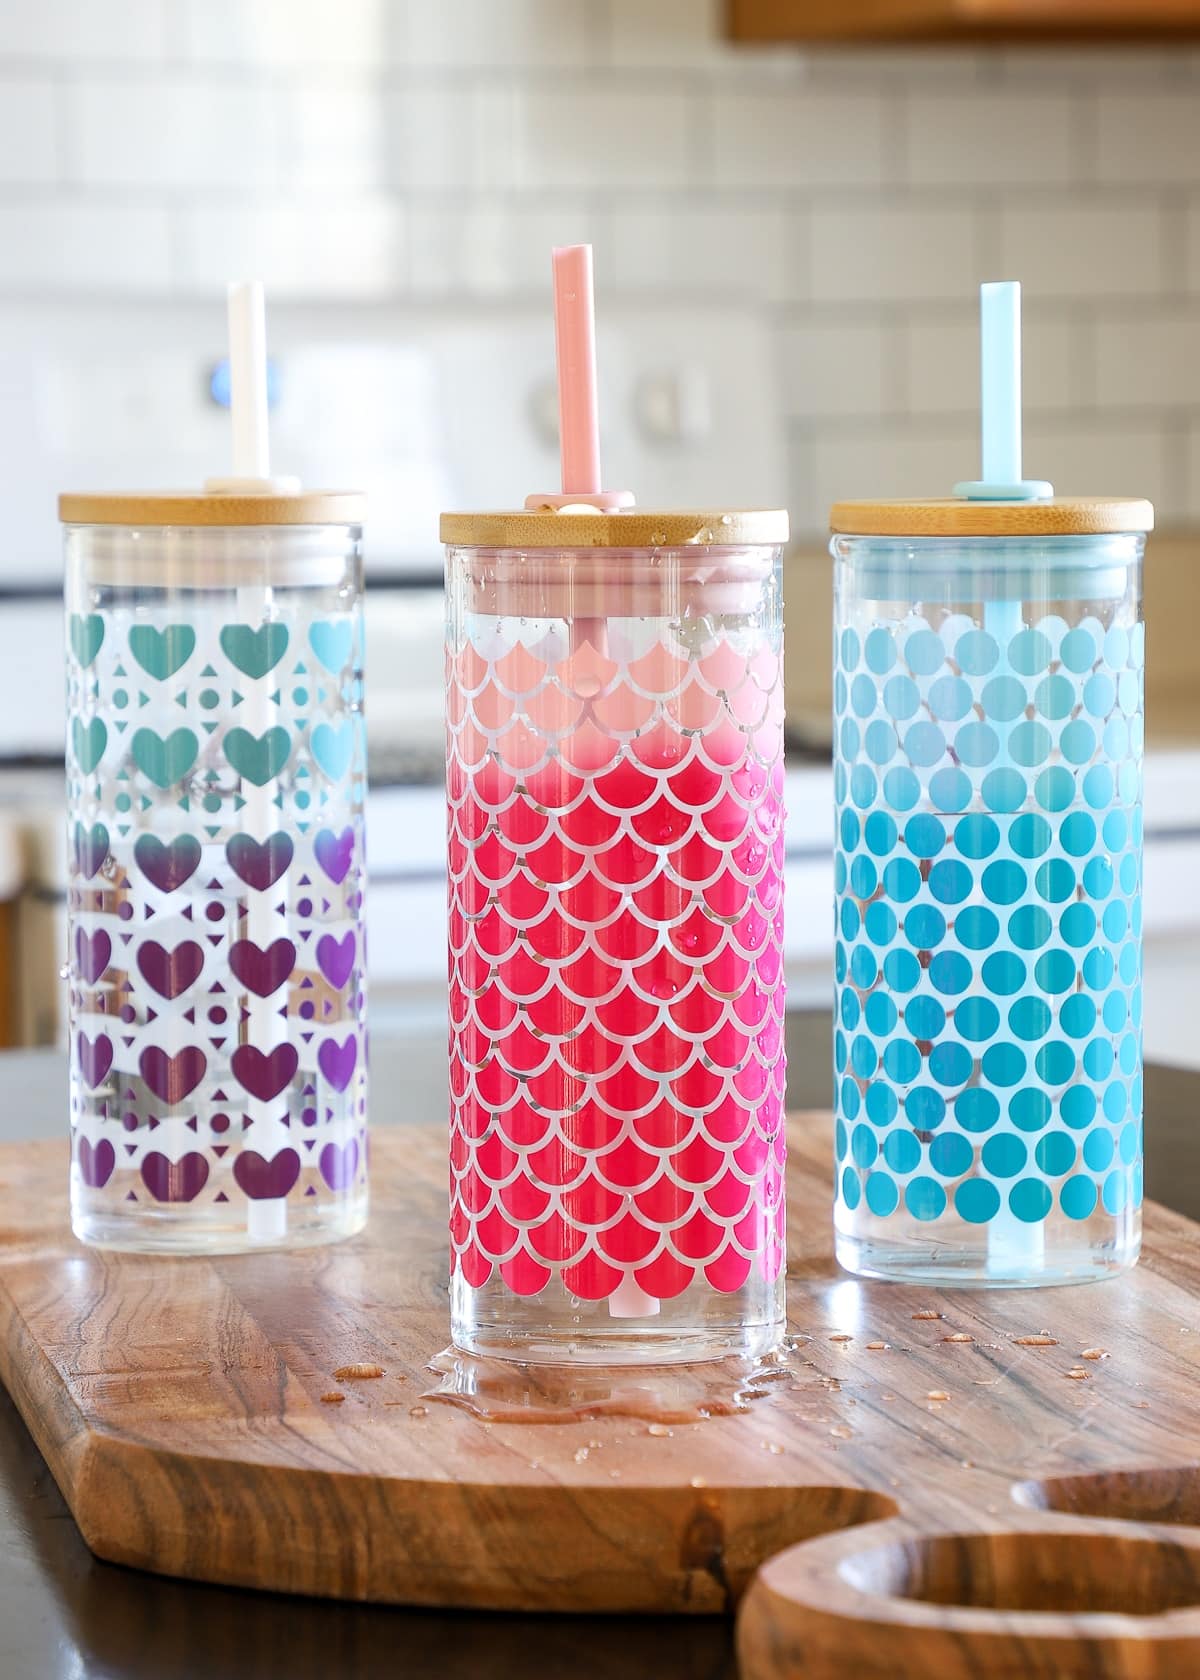 HOW TO MAKE A VINYL PLASTIC TUMBLER WITH YOUR CRICUT